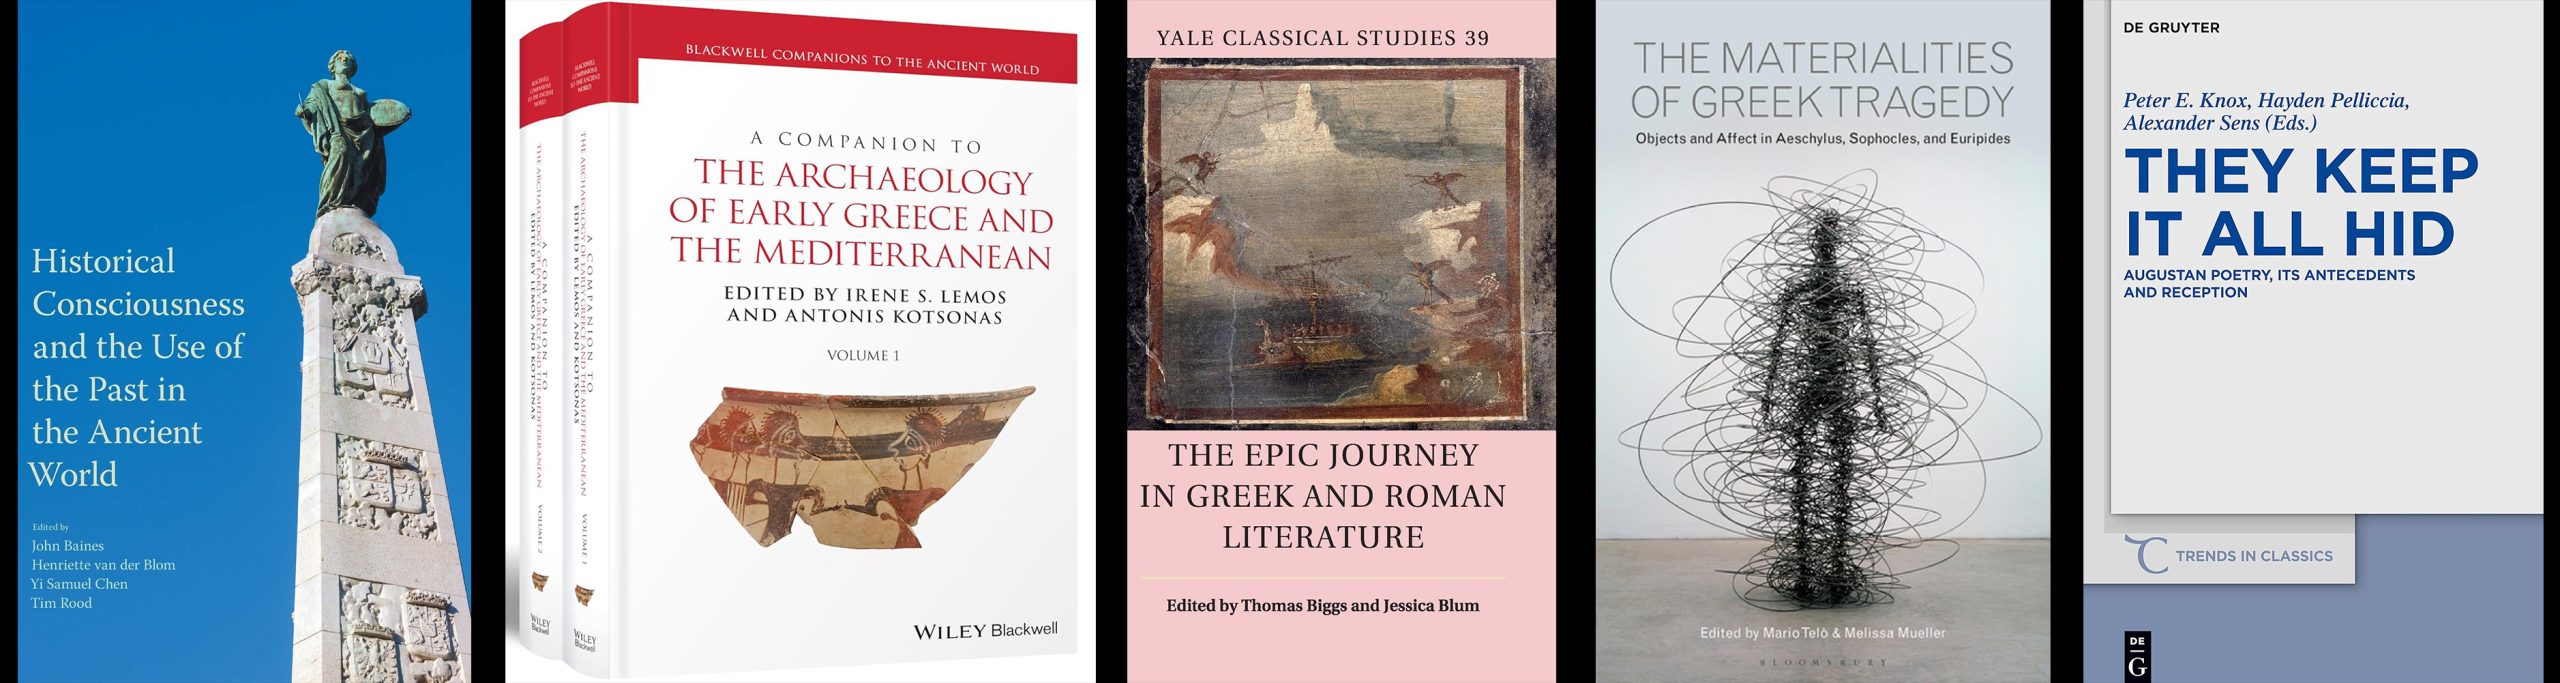 1. Historical Consciousness and the Use of the Past in the Ancient World. 2. A Companion to the Archaeology of Early Greece and the Mediterranean, edited by Irene S. Lemos and Antonis Kotsonas. 3. The Epic Journey in Greek and Roman Literature, edited by Thomas Biggs and Jessica Blum. 4. The Materialites of Greek Tragedy: Objects and Affect in Aeschylus, Sophocles, and Euripides. 5. They Keep it All Hid: Augustan Poetry, its Antecedents and Reception